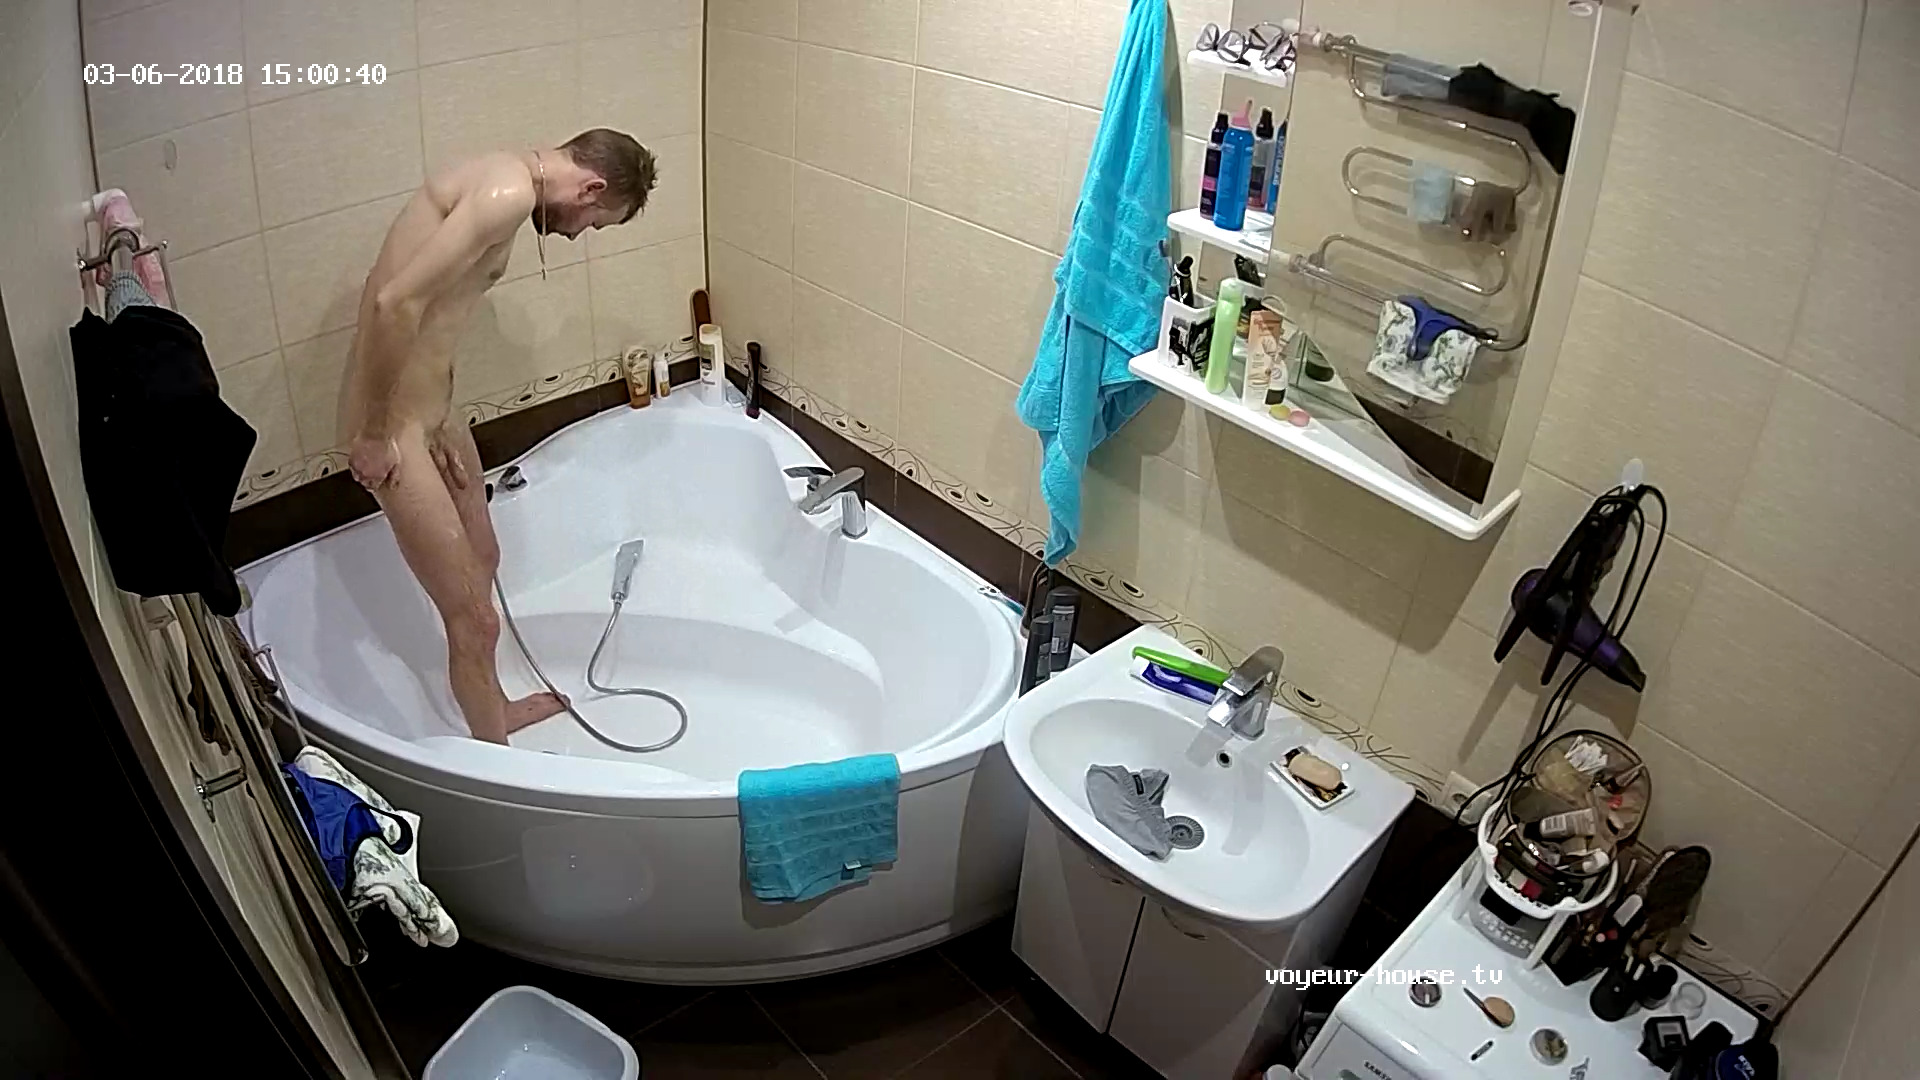 Guest guy afternoon shower 6th Mar 2018